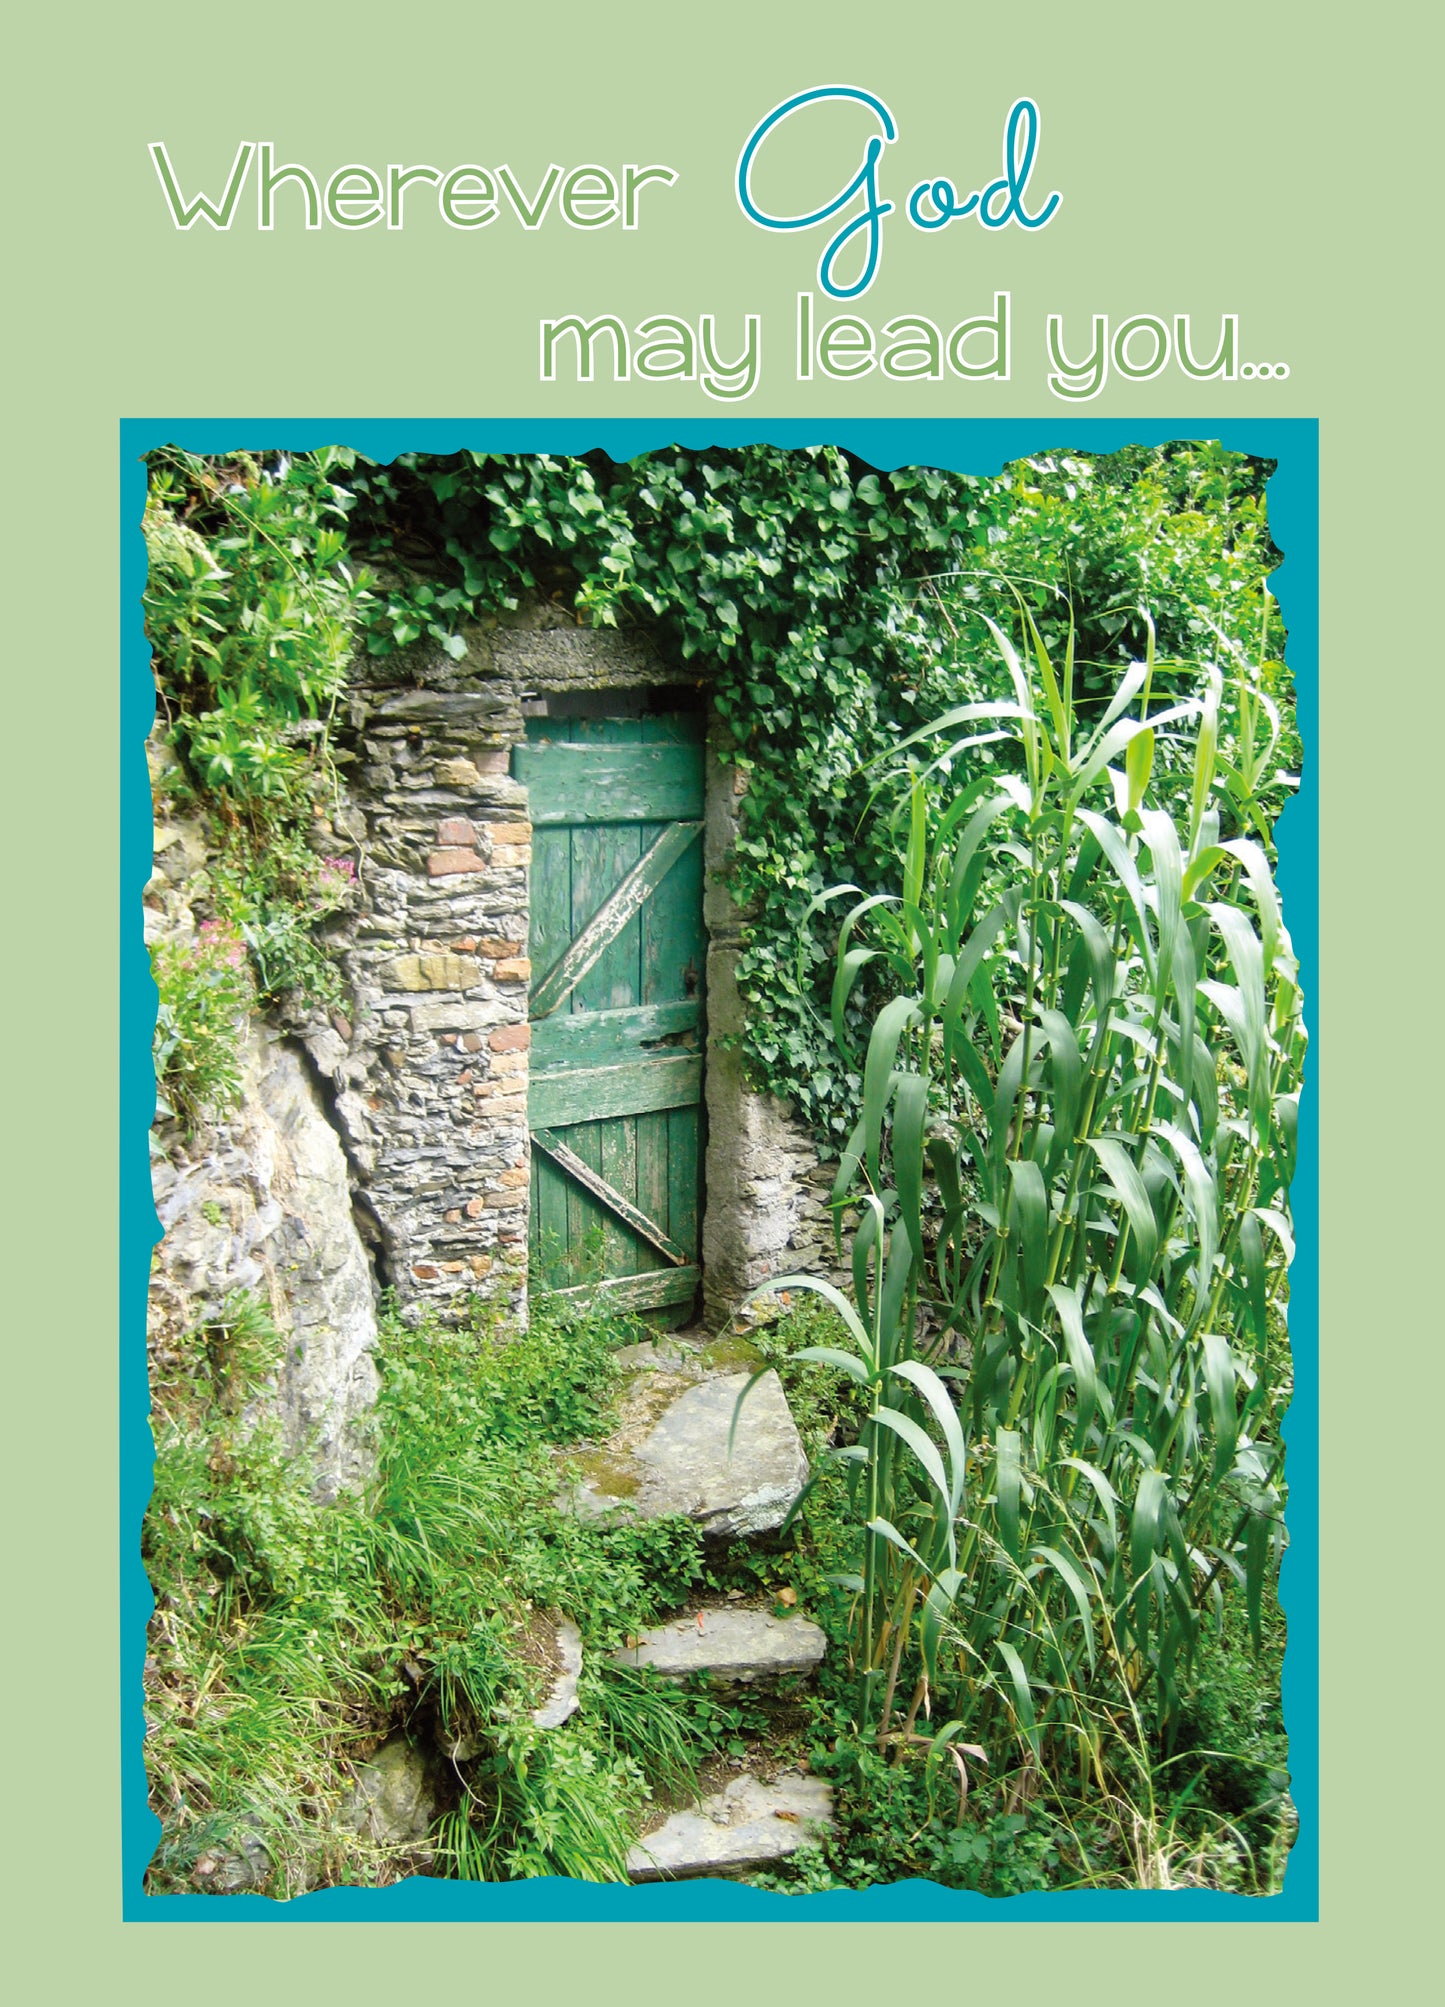 Encouragement- Doors of Hope- #284 featuring The Passion Translation Bible